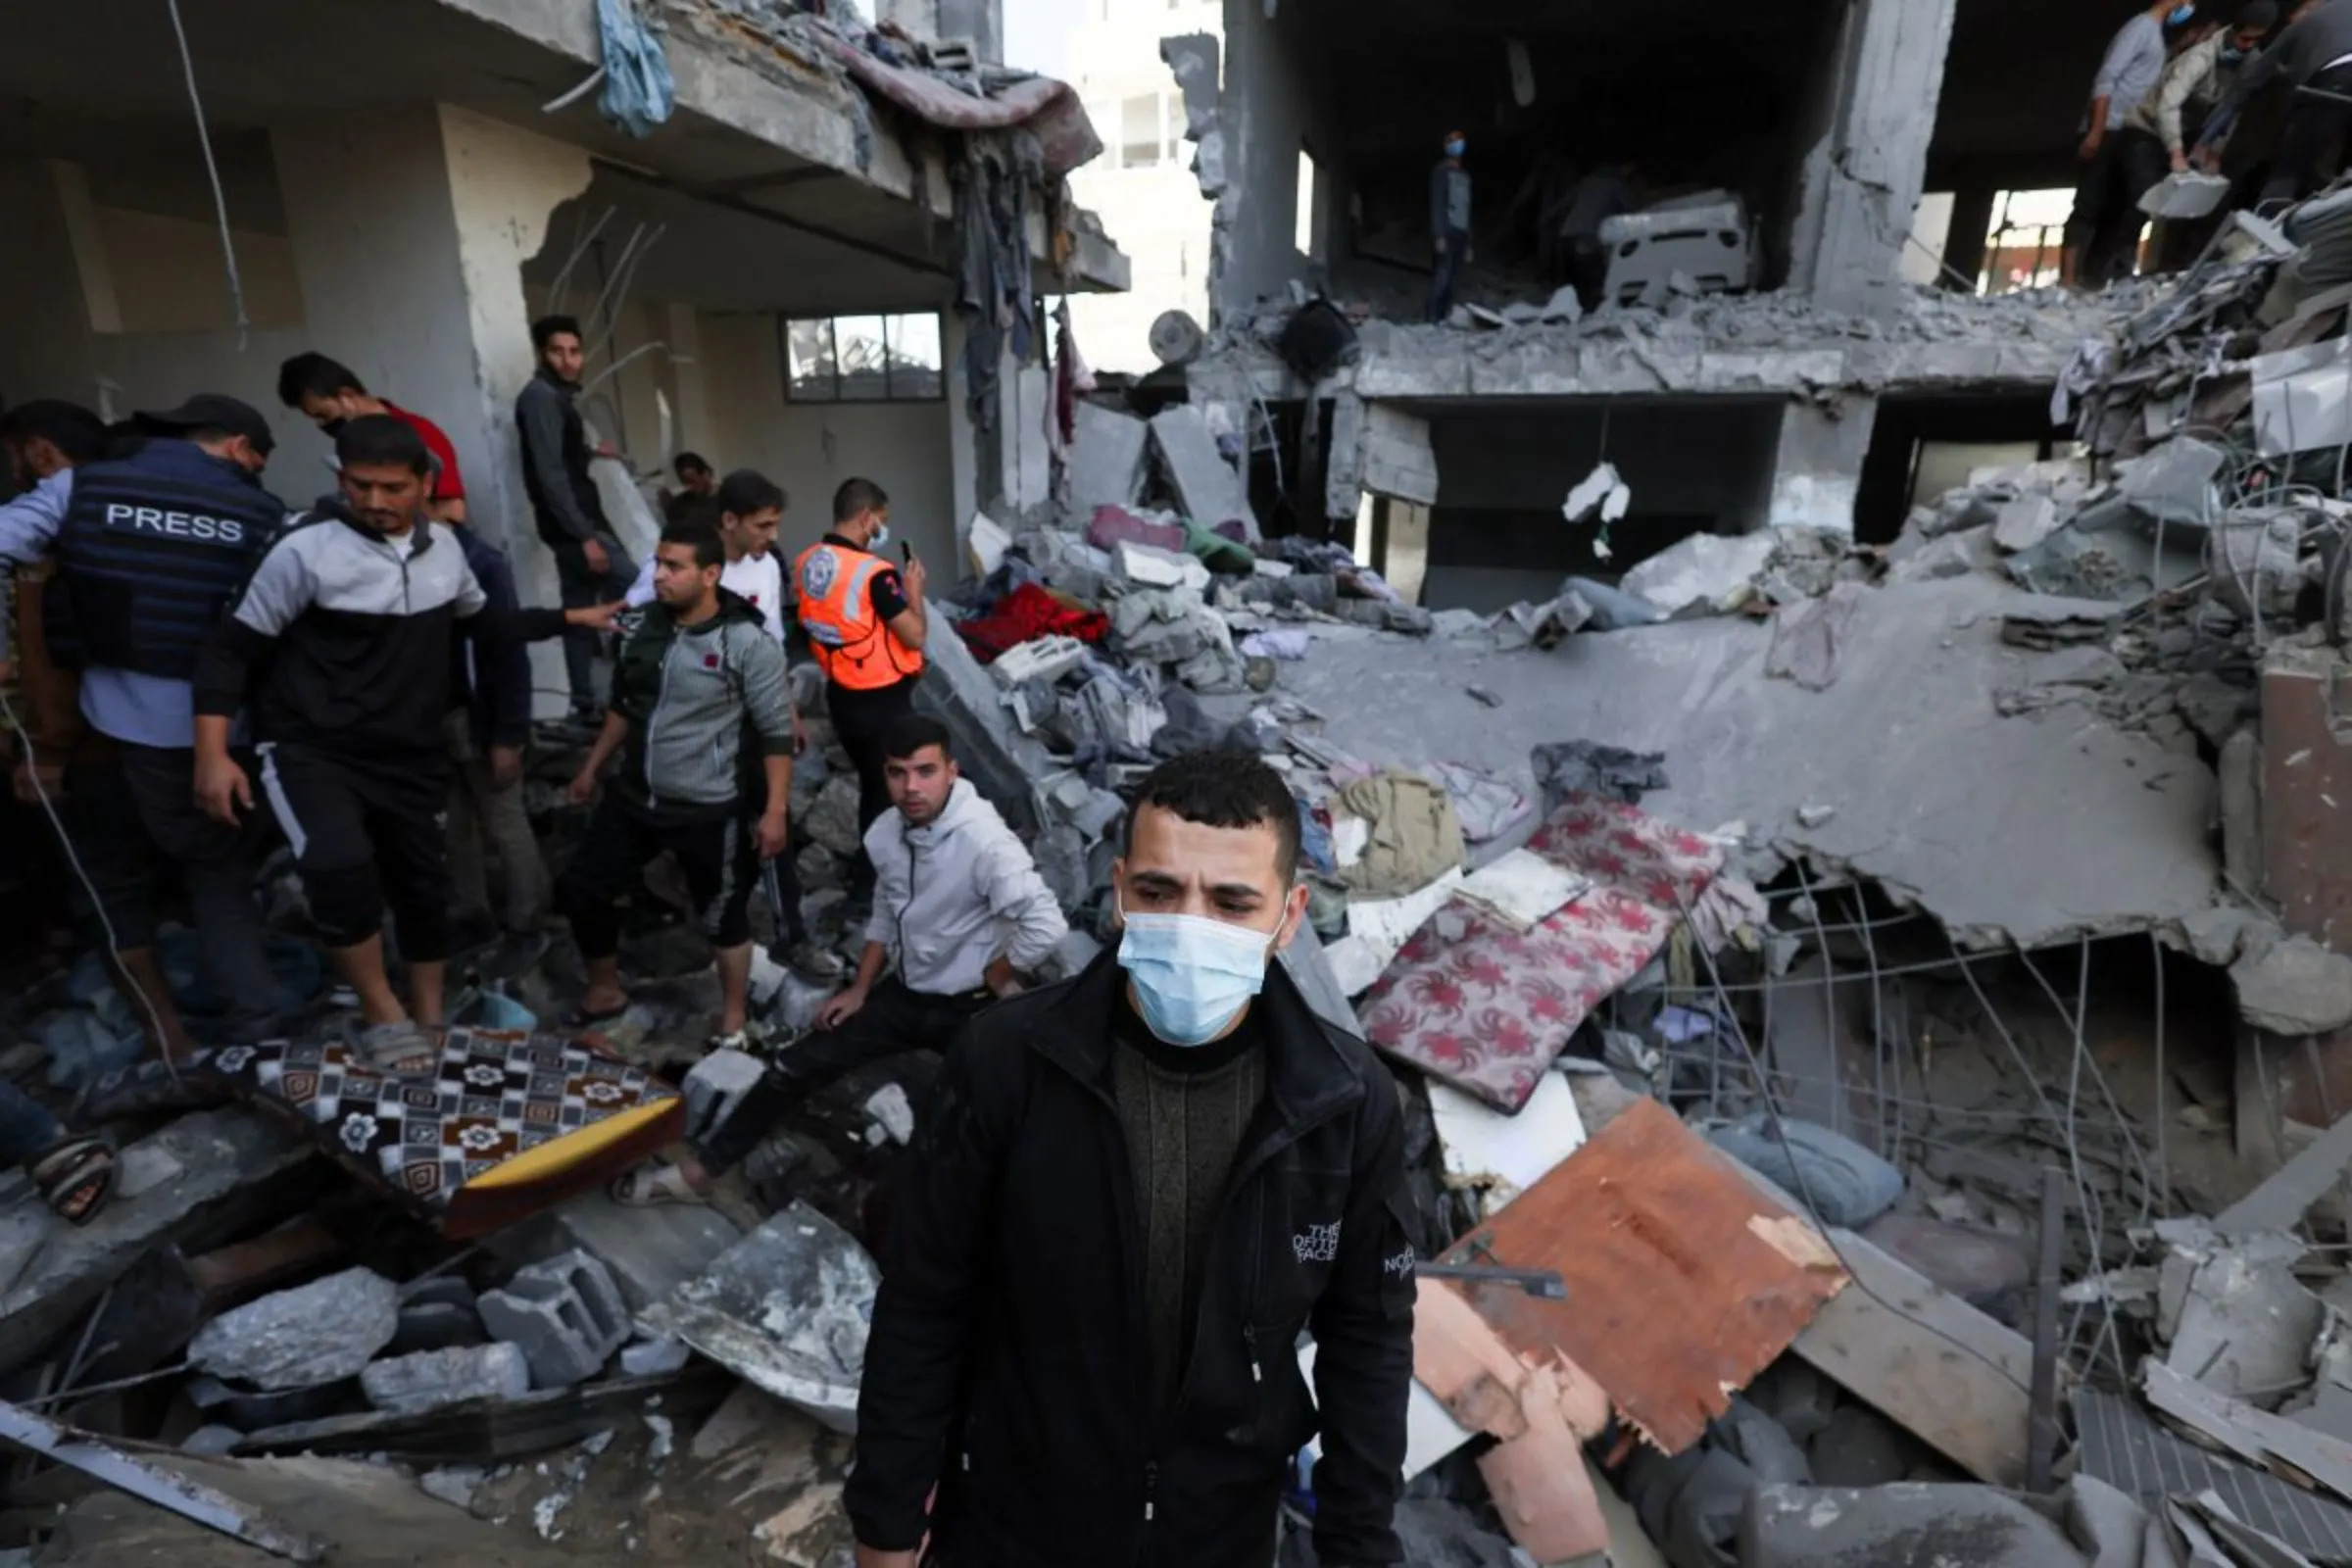 A Palestinian man wears a protective face mask as others search for casualties at the site of an Israeli strike on a house in Rafah, amid the ongoing conflict between Israel and the Palestinian Islamist group Hamas, in the southern Gaza Strip November 23, 2023. REUTERS/Ibraheem Abu Mustafa